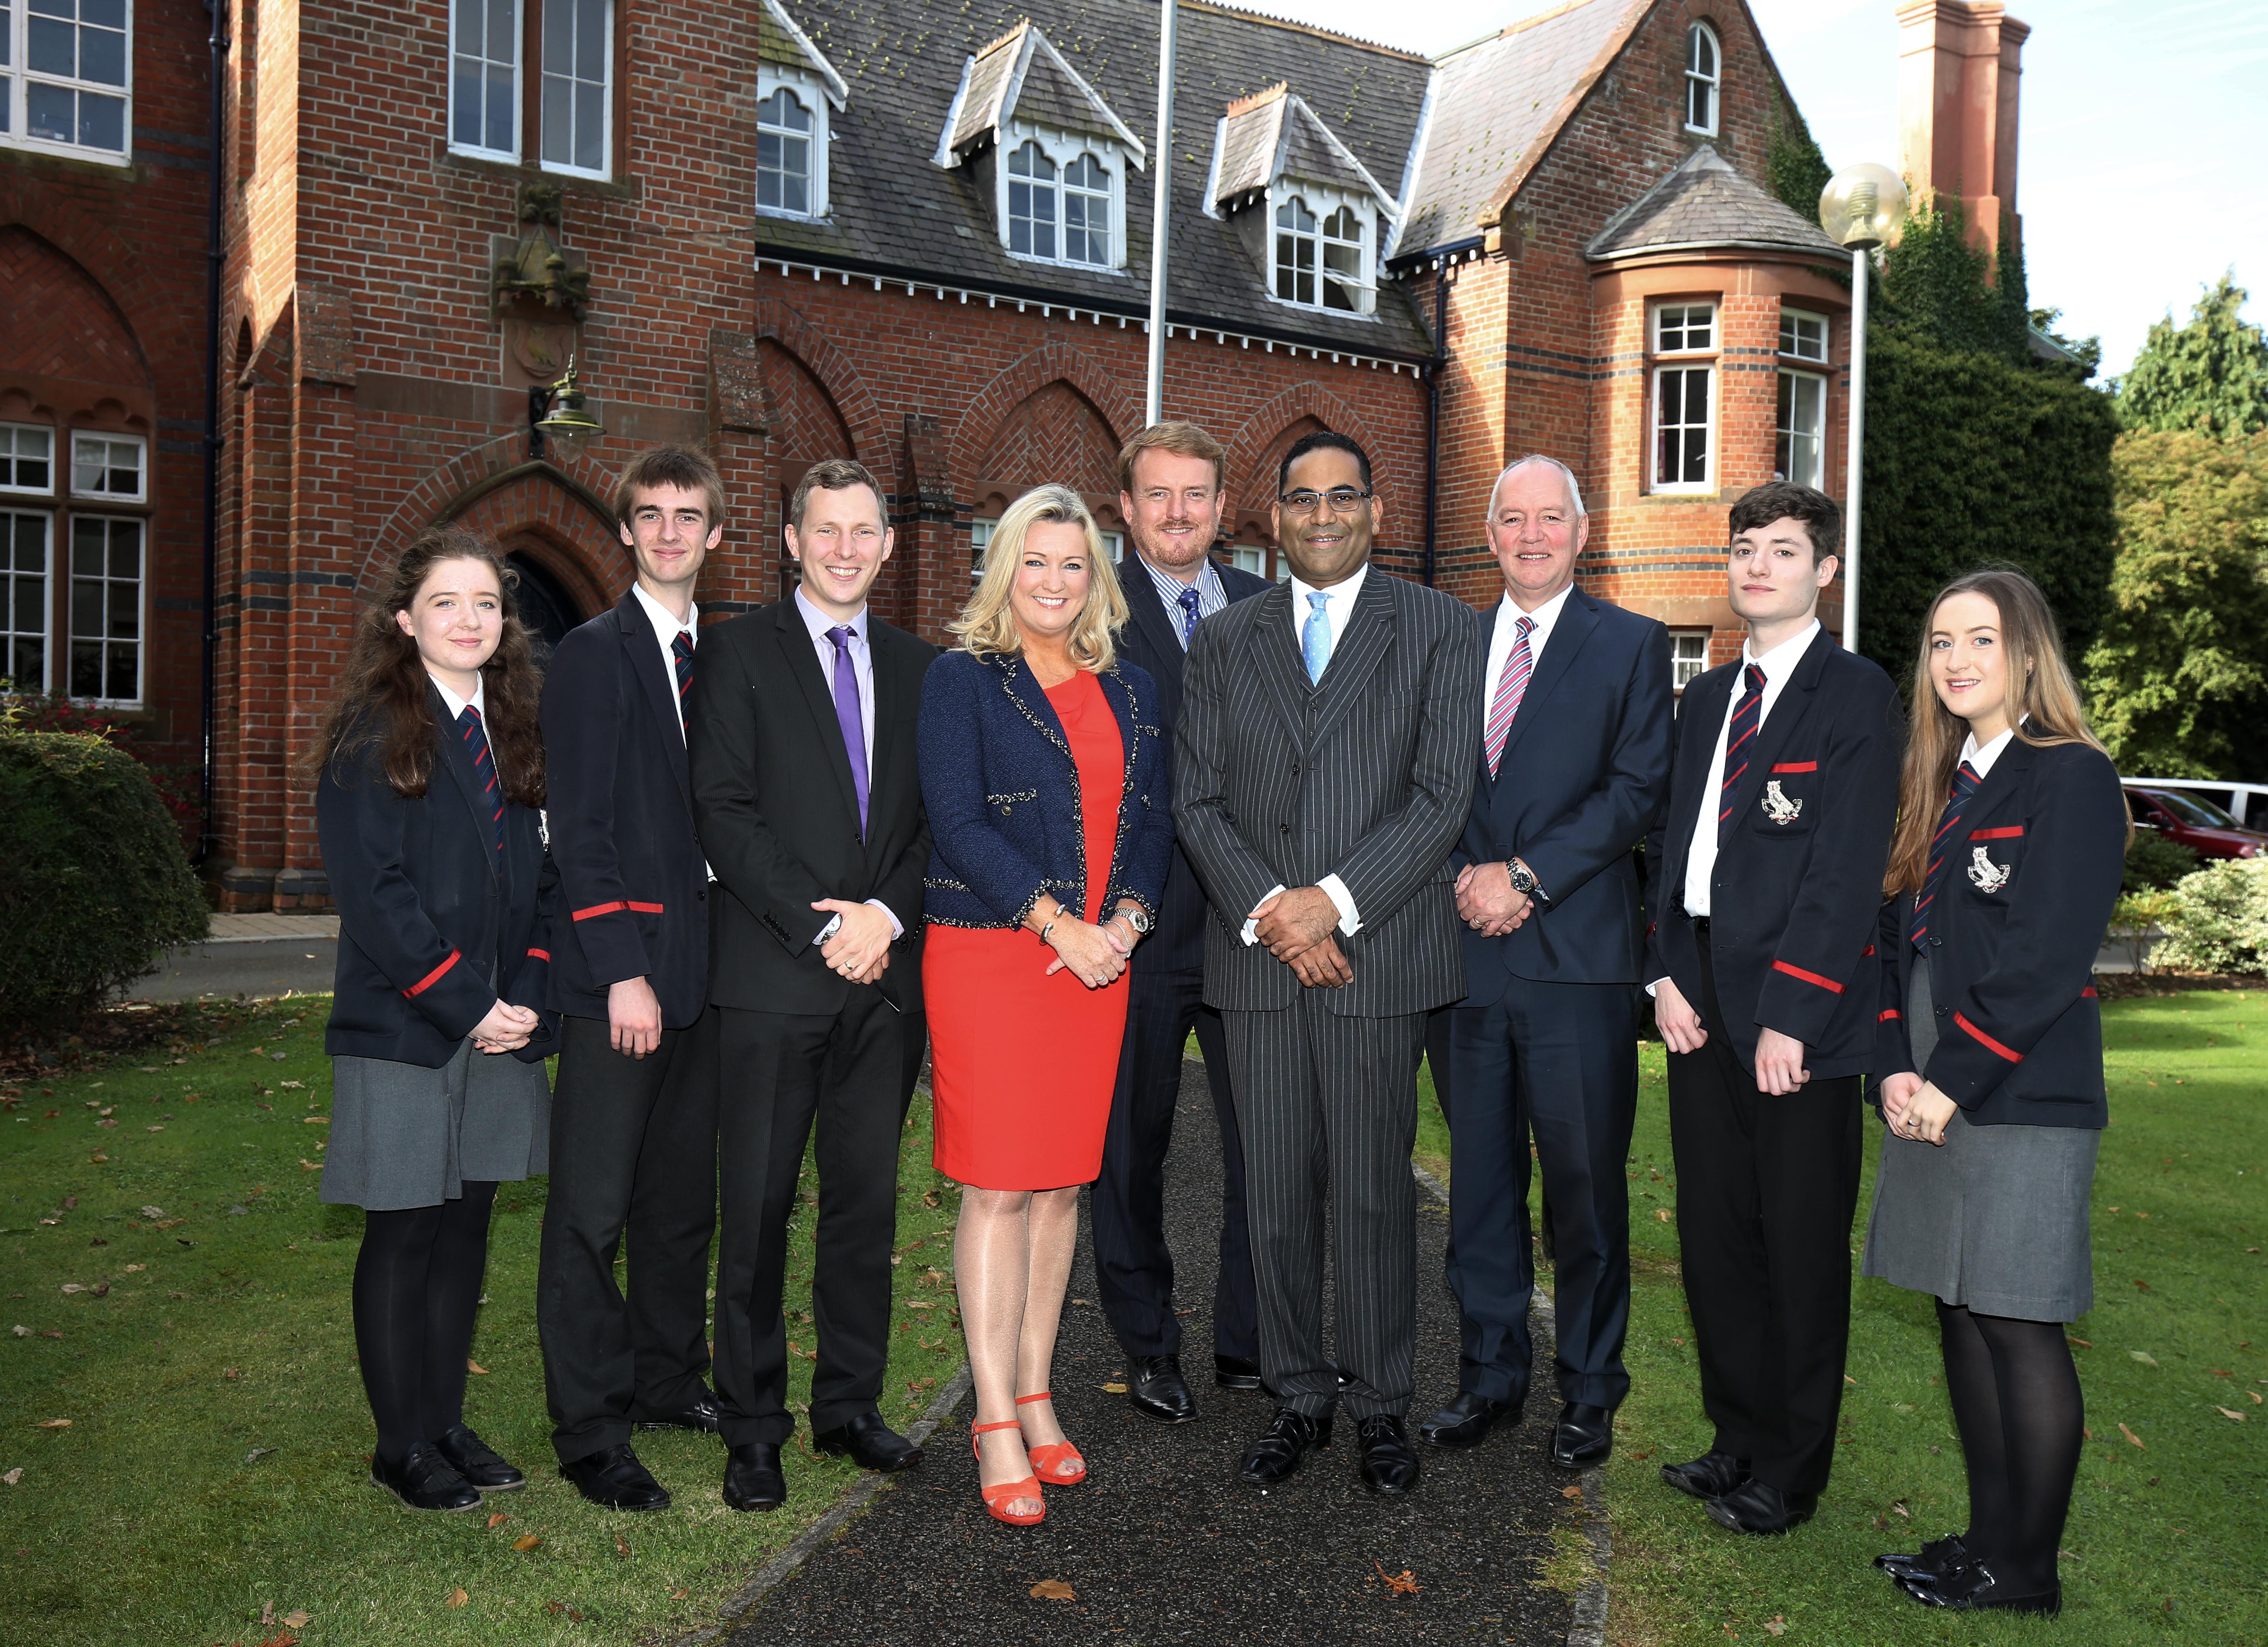 The Secretary-General of the Commonwealth Parliamentary Association (CPA) Mr Akbar Khan pictured with Jo-Anne Dobson MLA, Chair of the CPA Northern Ireland Branch on a visit to Lurgan College. Today’s visit was organised as part of the CPA Roadshows tour of Commonwealth Schools and Universities.